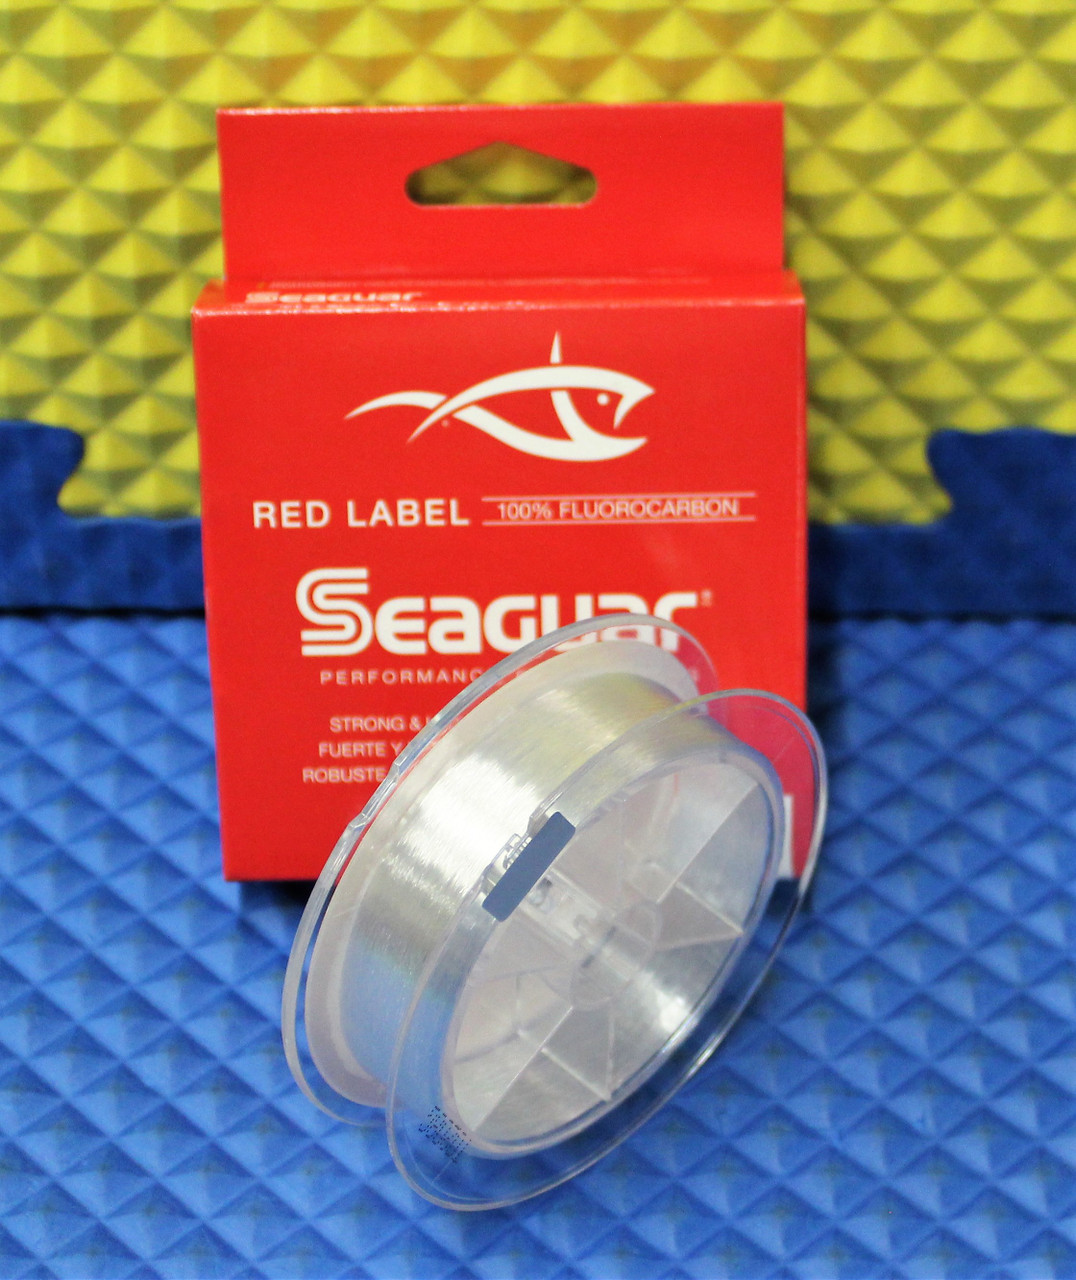 Seaguar Red Label 100% Fluorocarbon Line Clear CHOOSE YOUR LINE WEIGHT!